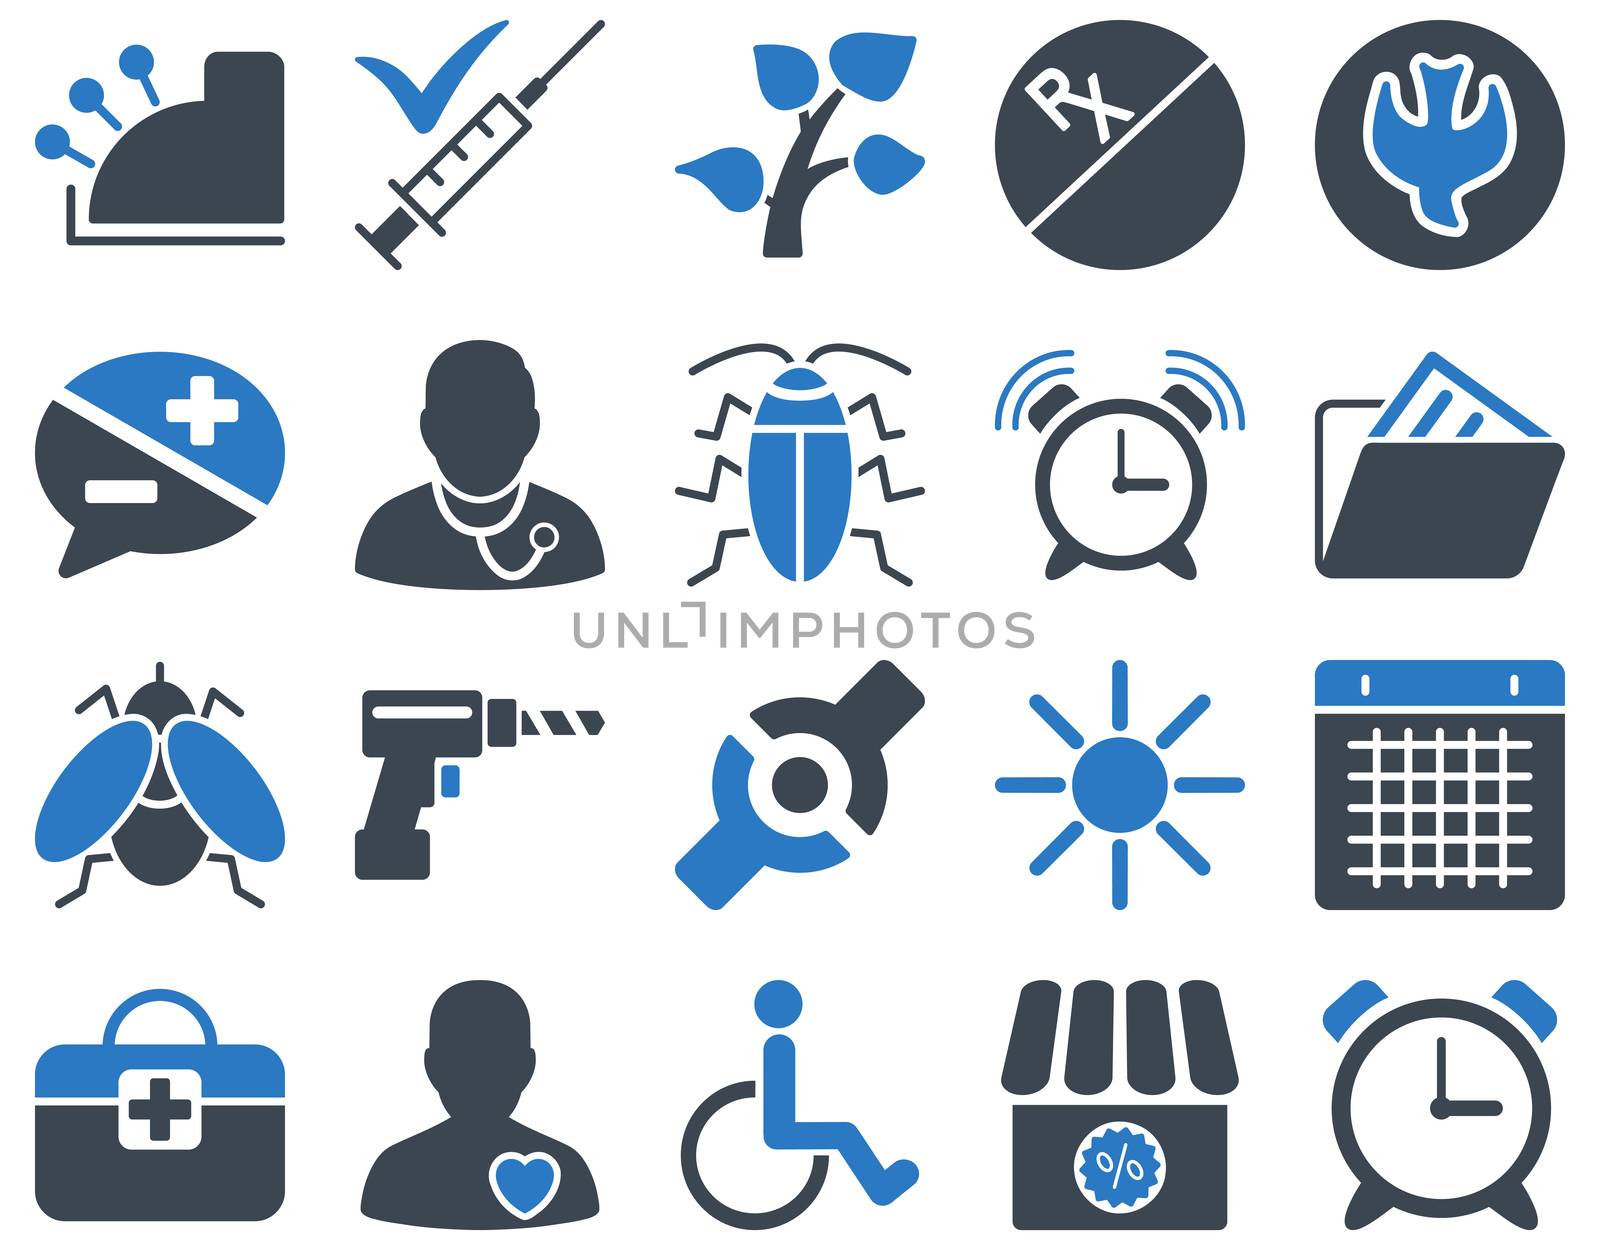 Medical icon set. Style: bicolor icons drawn with smooth blue colors on a white background.